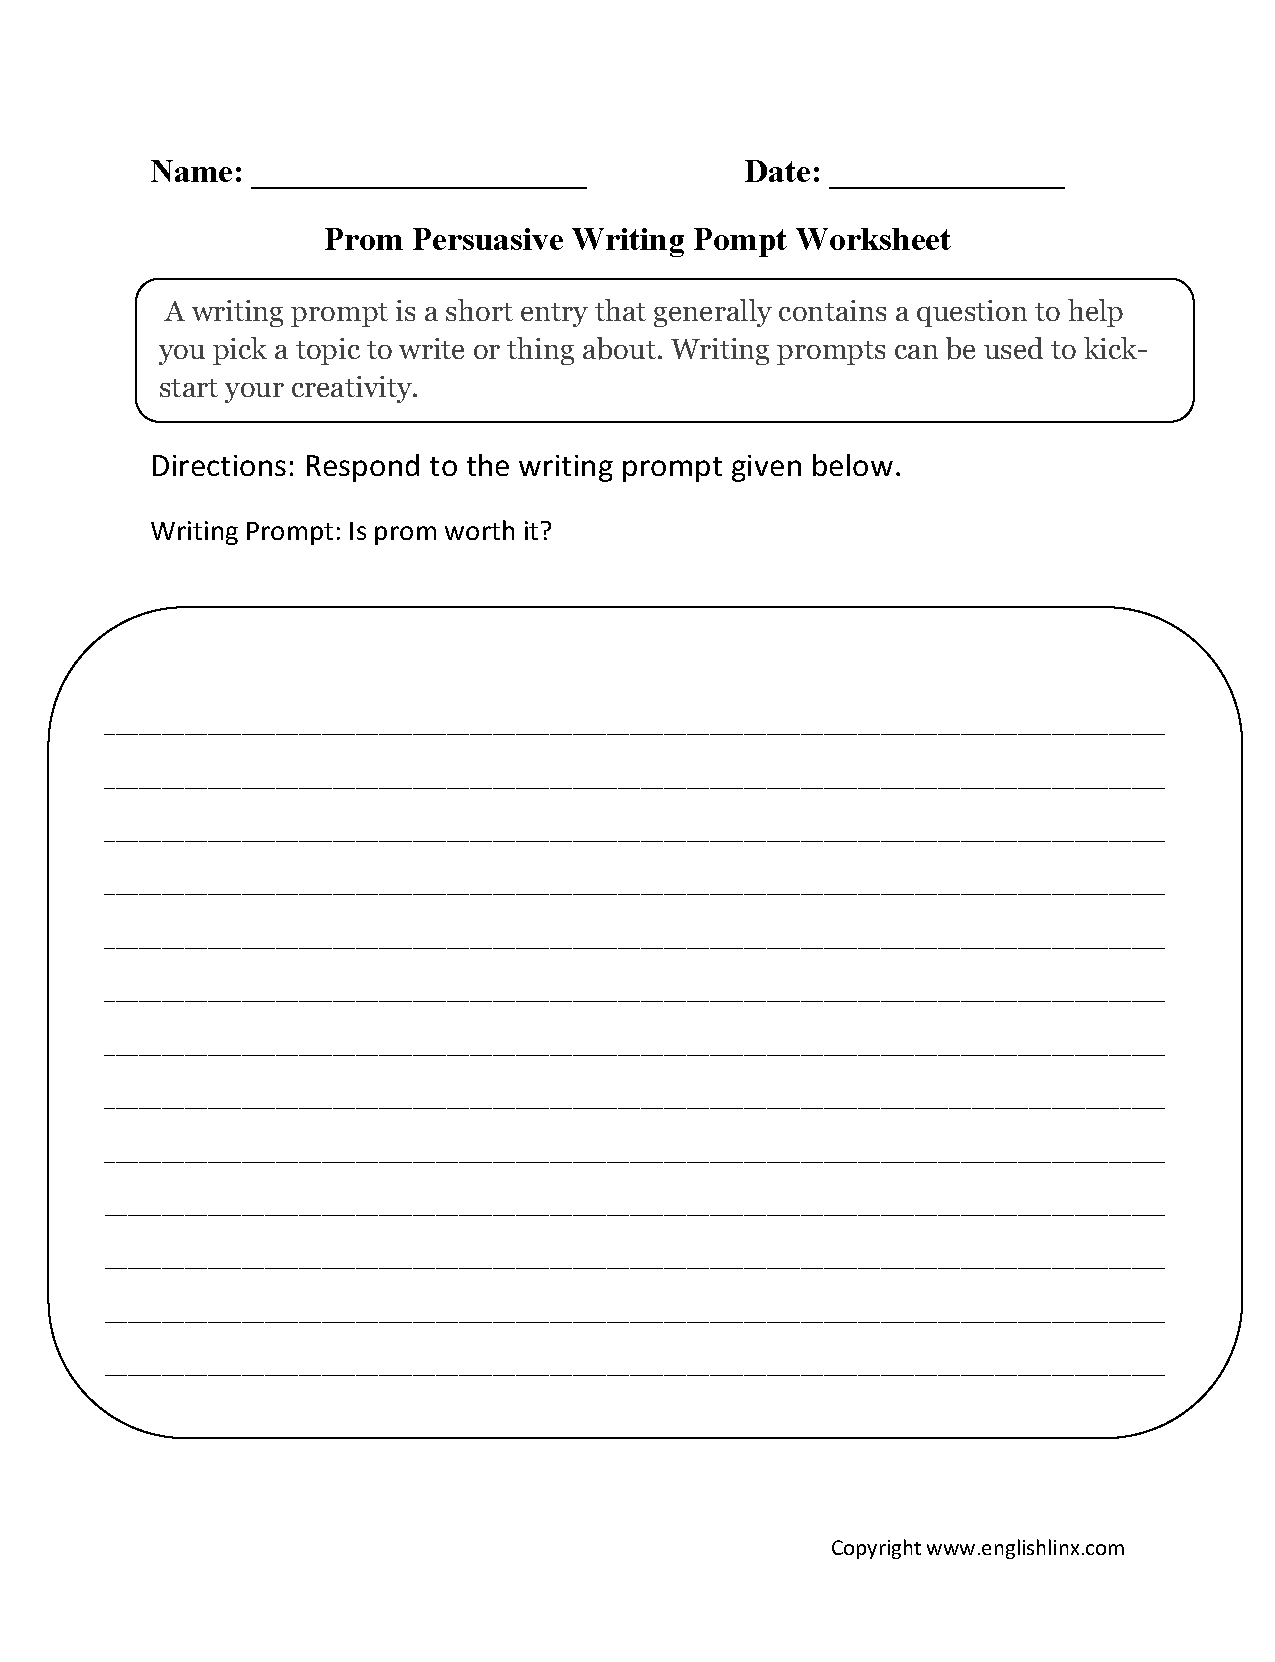 Prom Persuasive Writing Prompt Worksheets